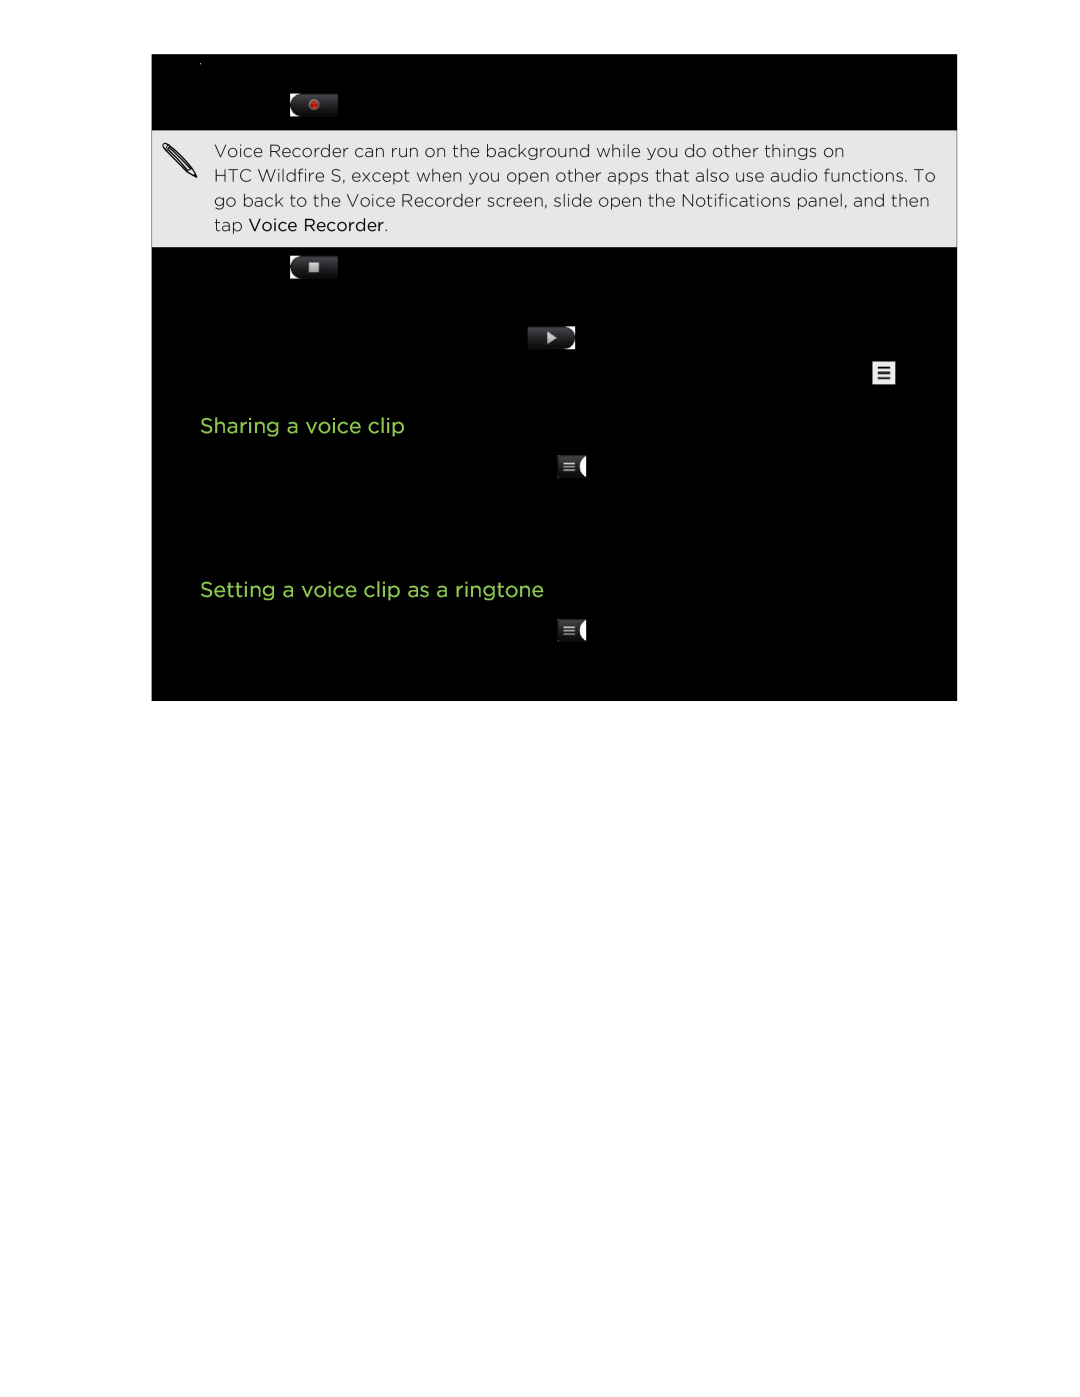 HTC manual Sharing a voice clip, Setting a voice clip as a ringtone, Market and other apps 